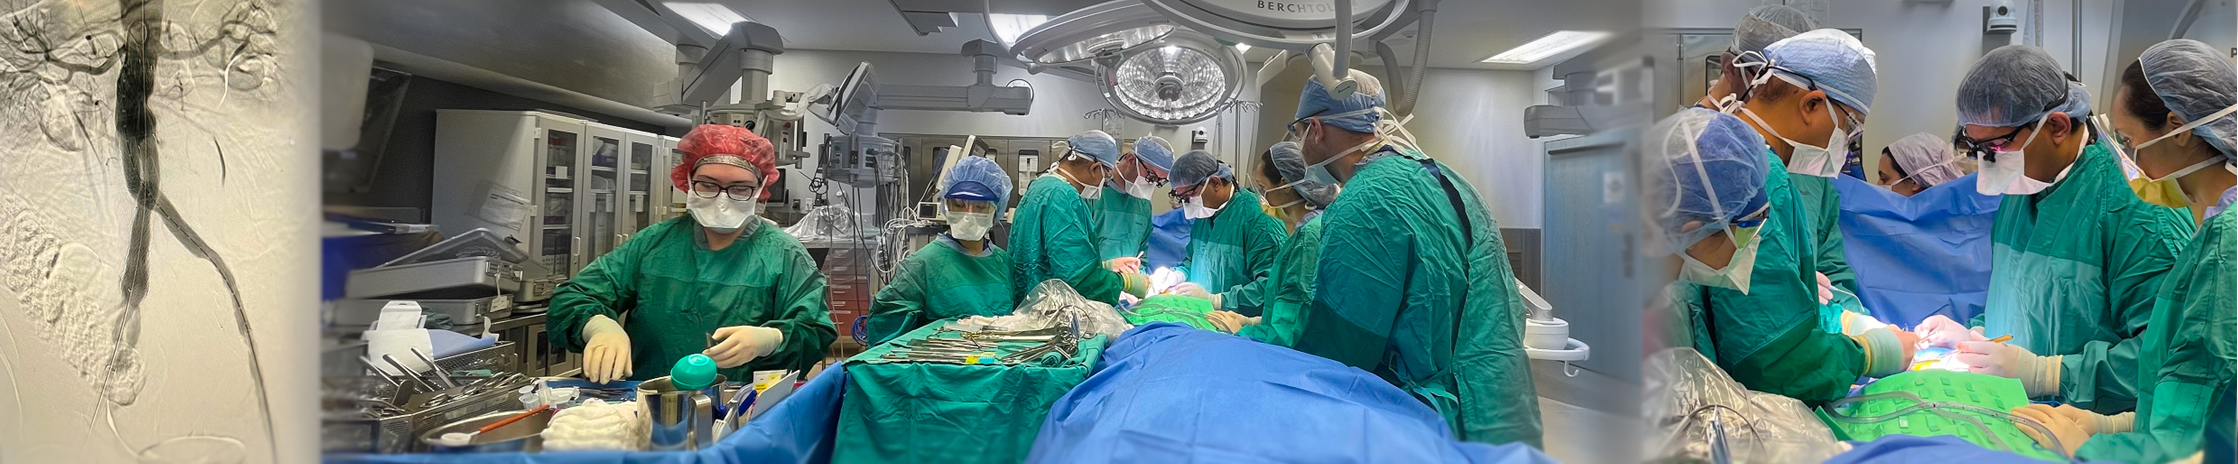 Vascular faculty mid surgery picture